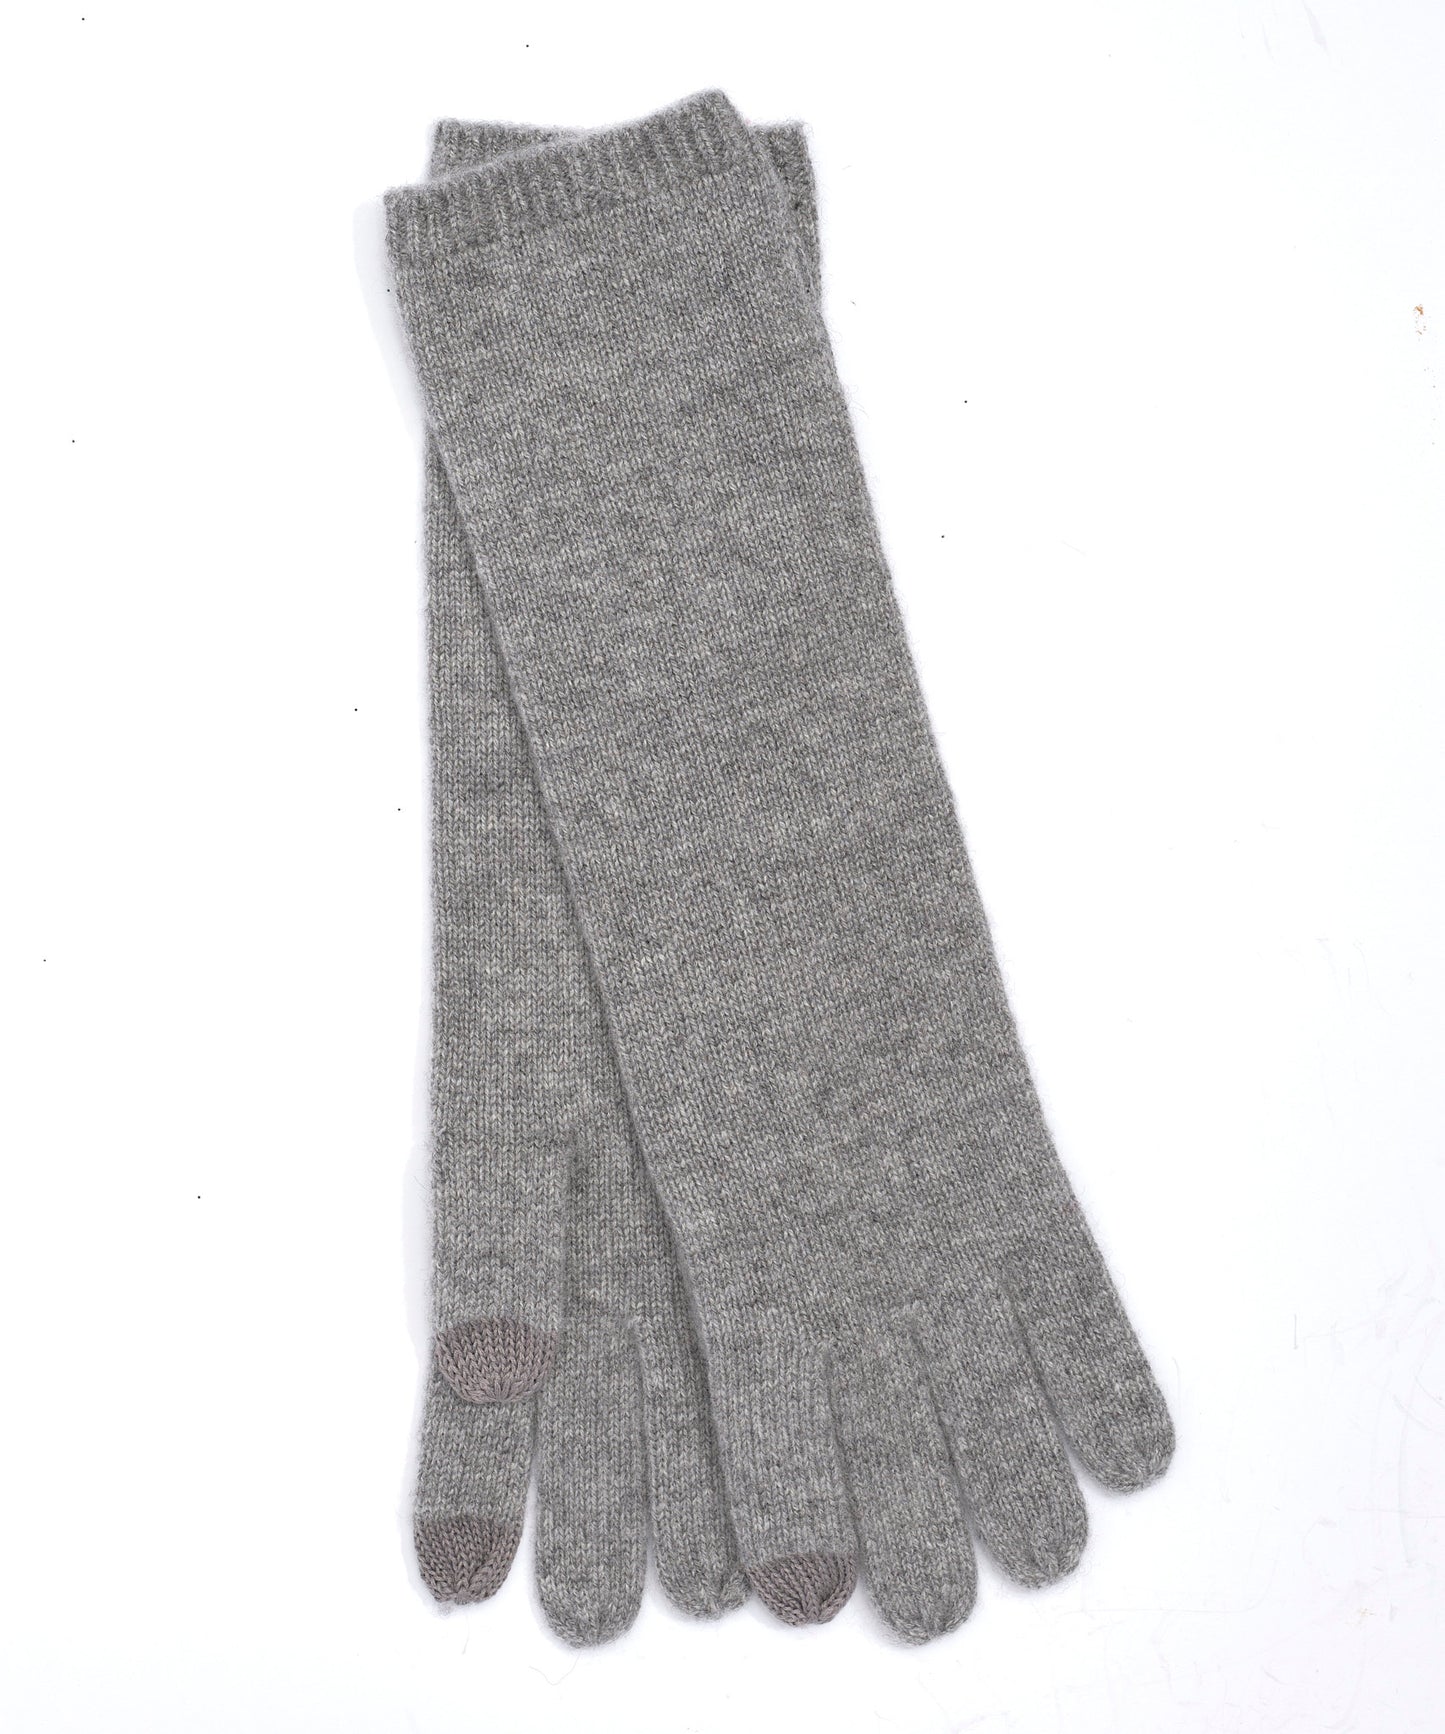 Cashmere Long Glove in color Grey Heather